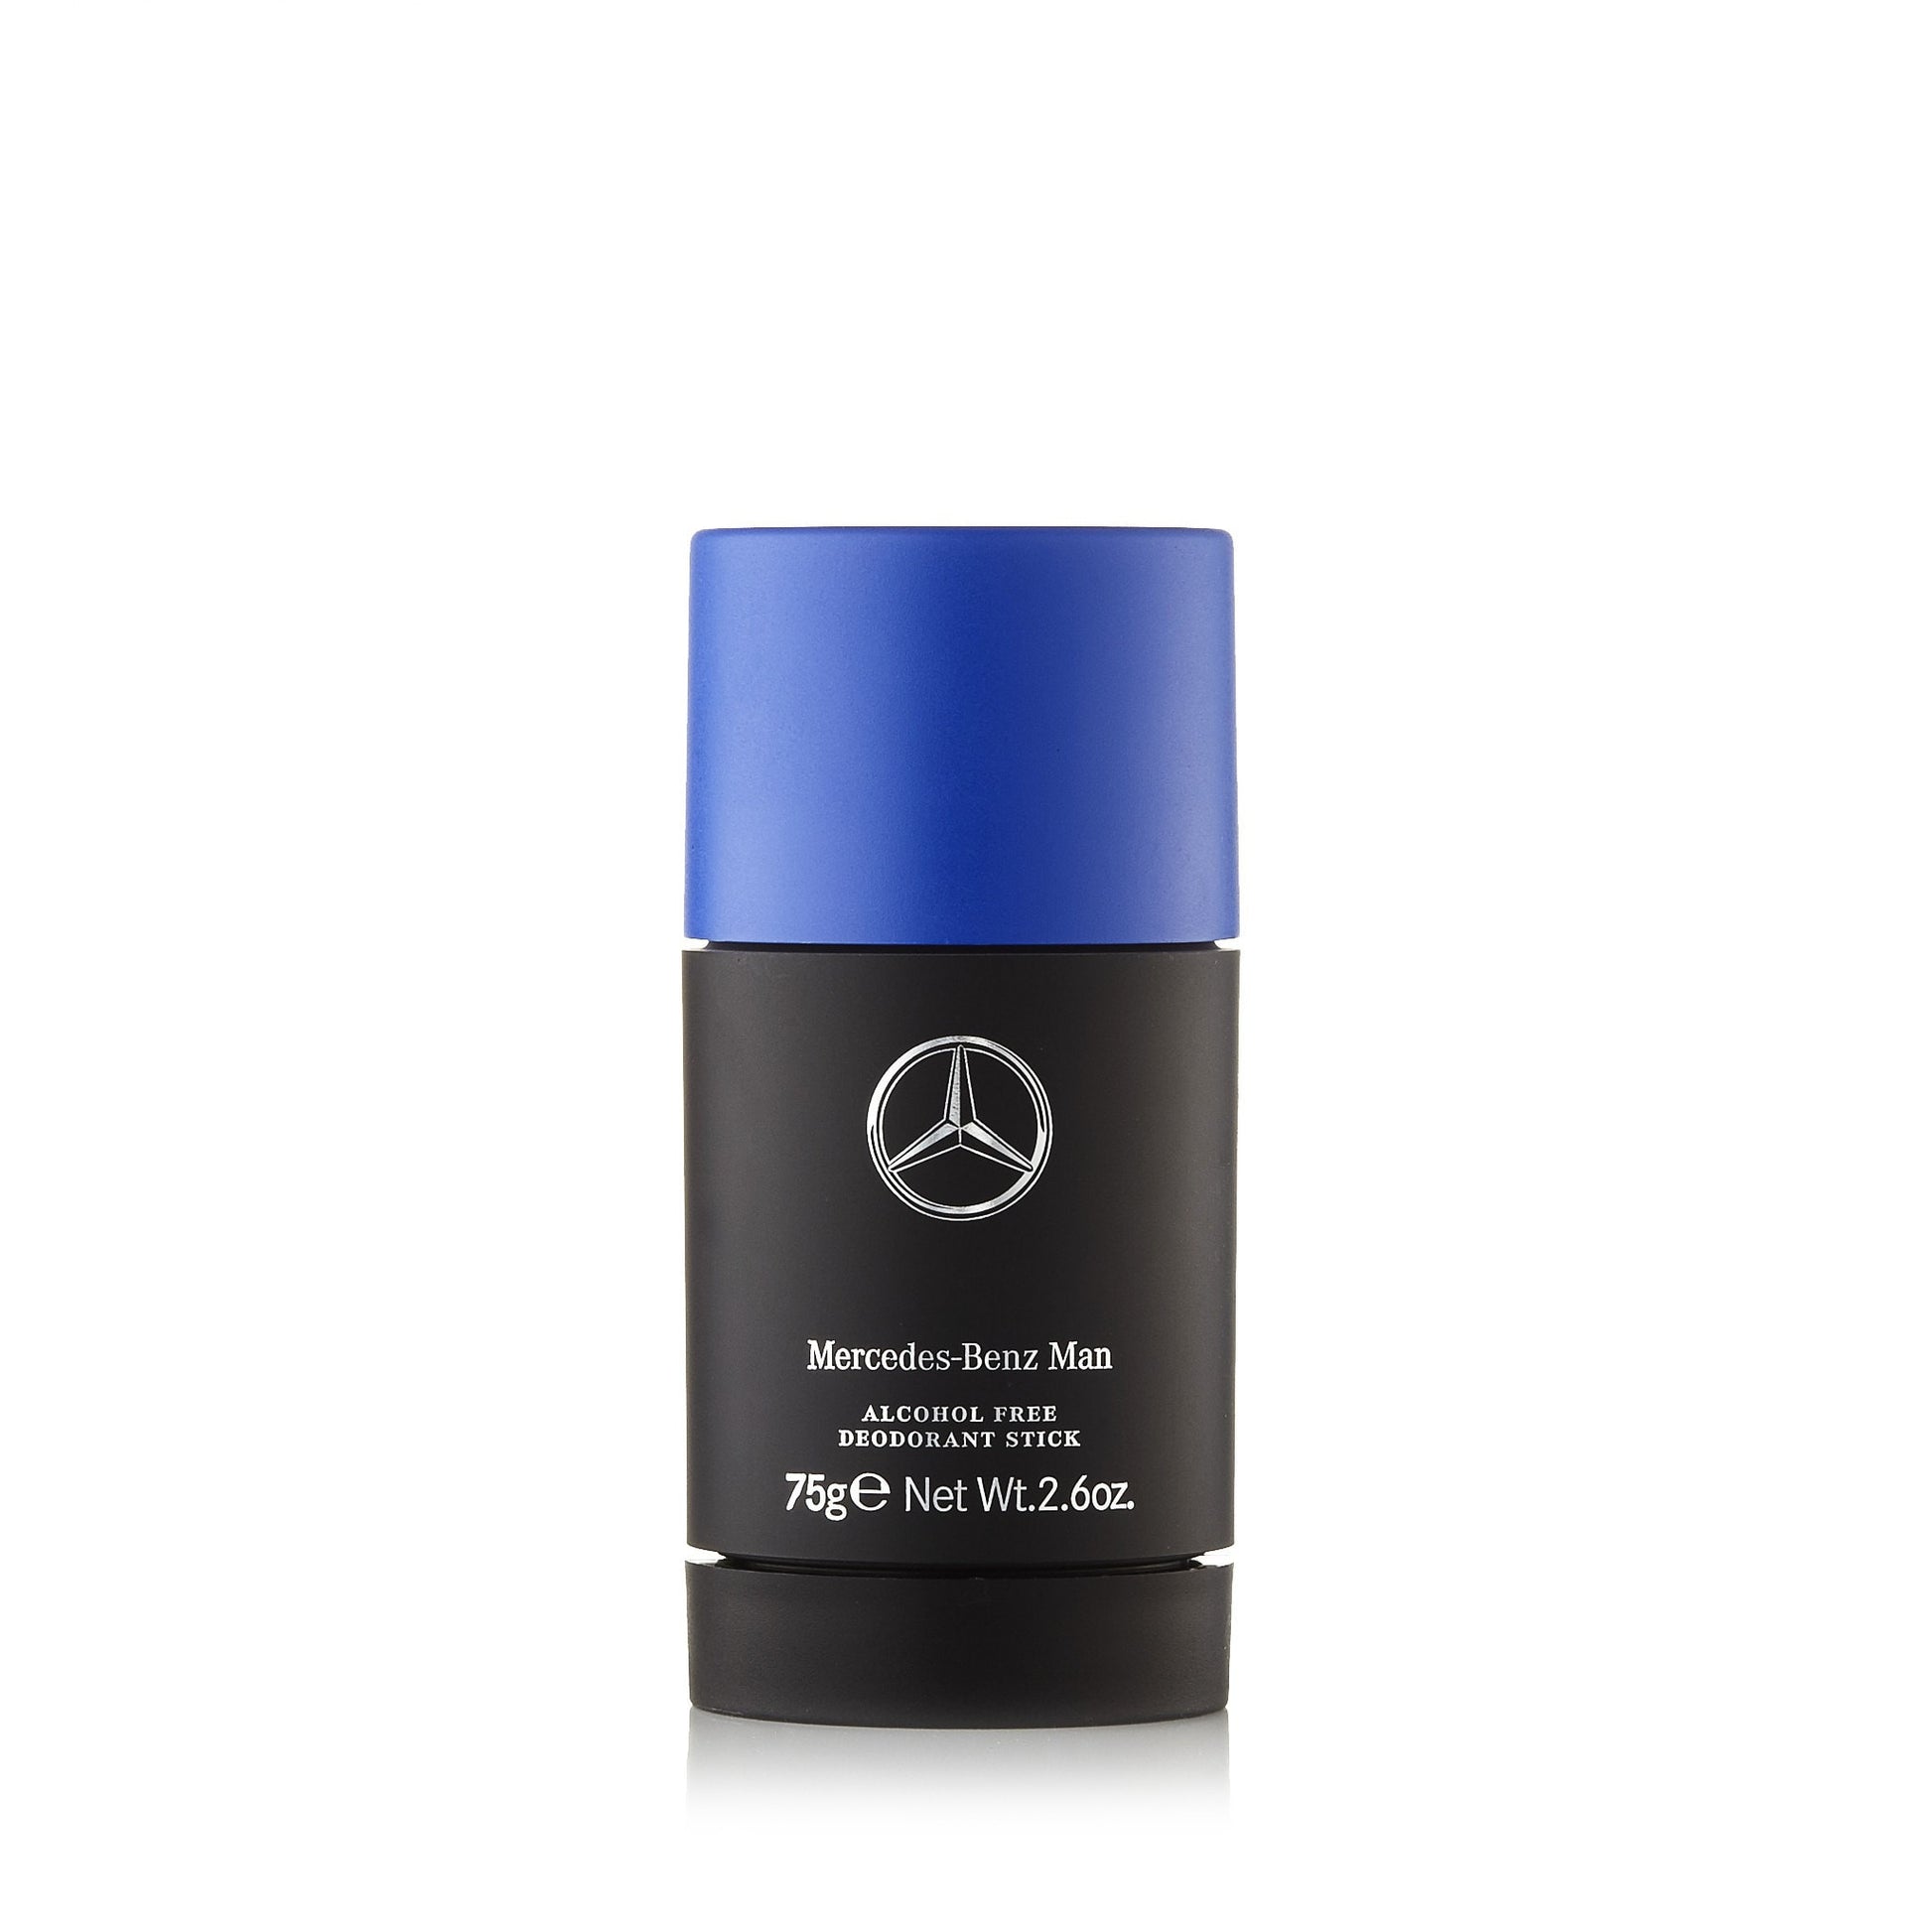 Mercedes-Benz Man Deodorant for Men by Mercedes-Benz 2.6 oz. Click to open in modal